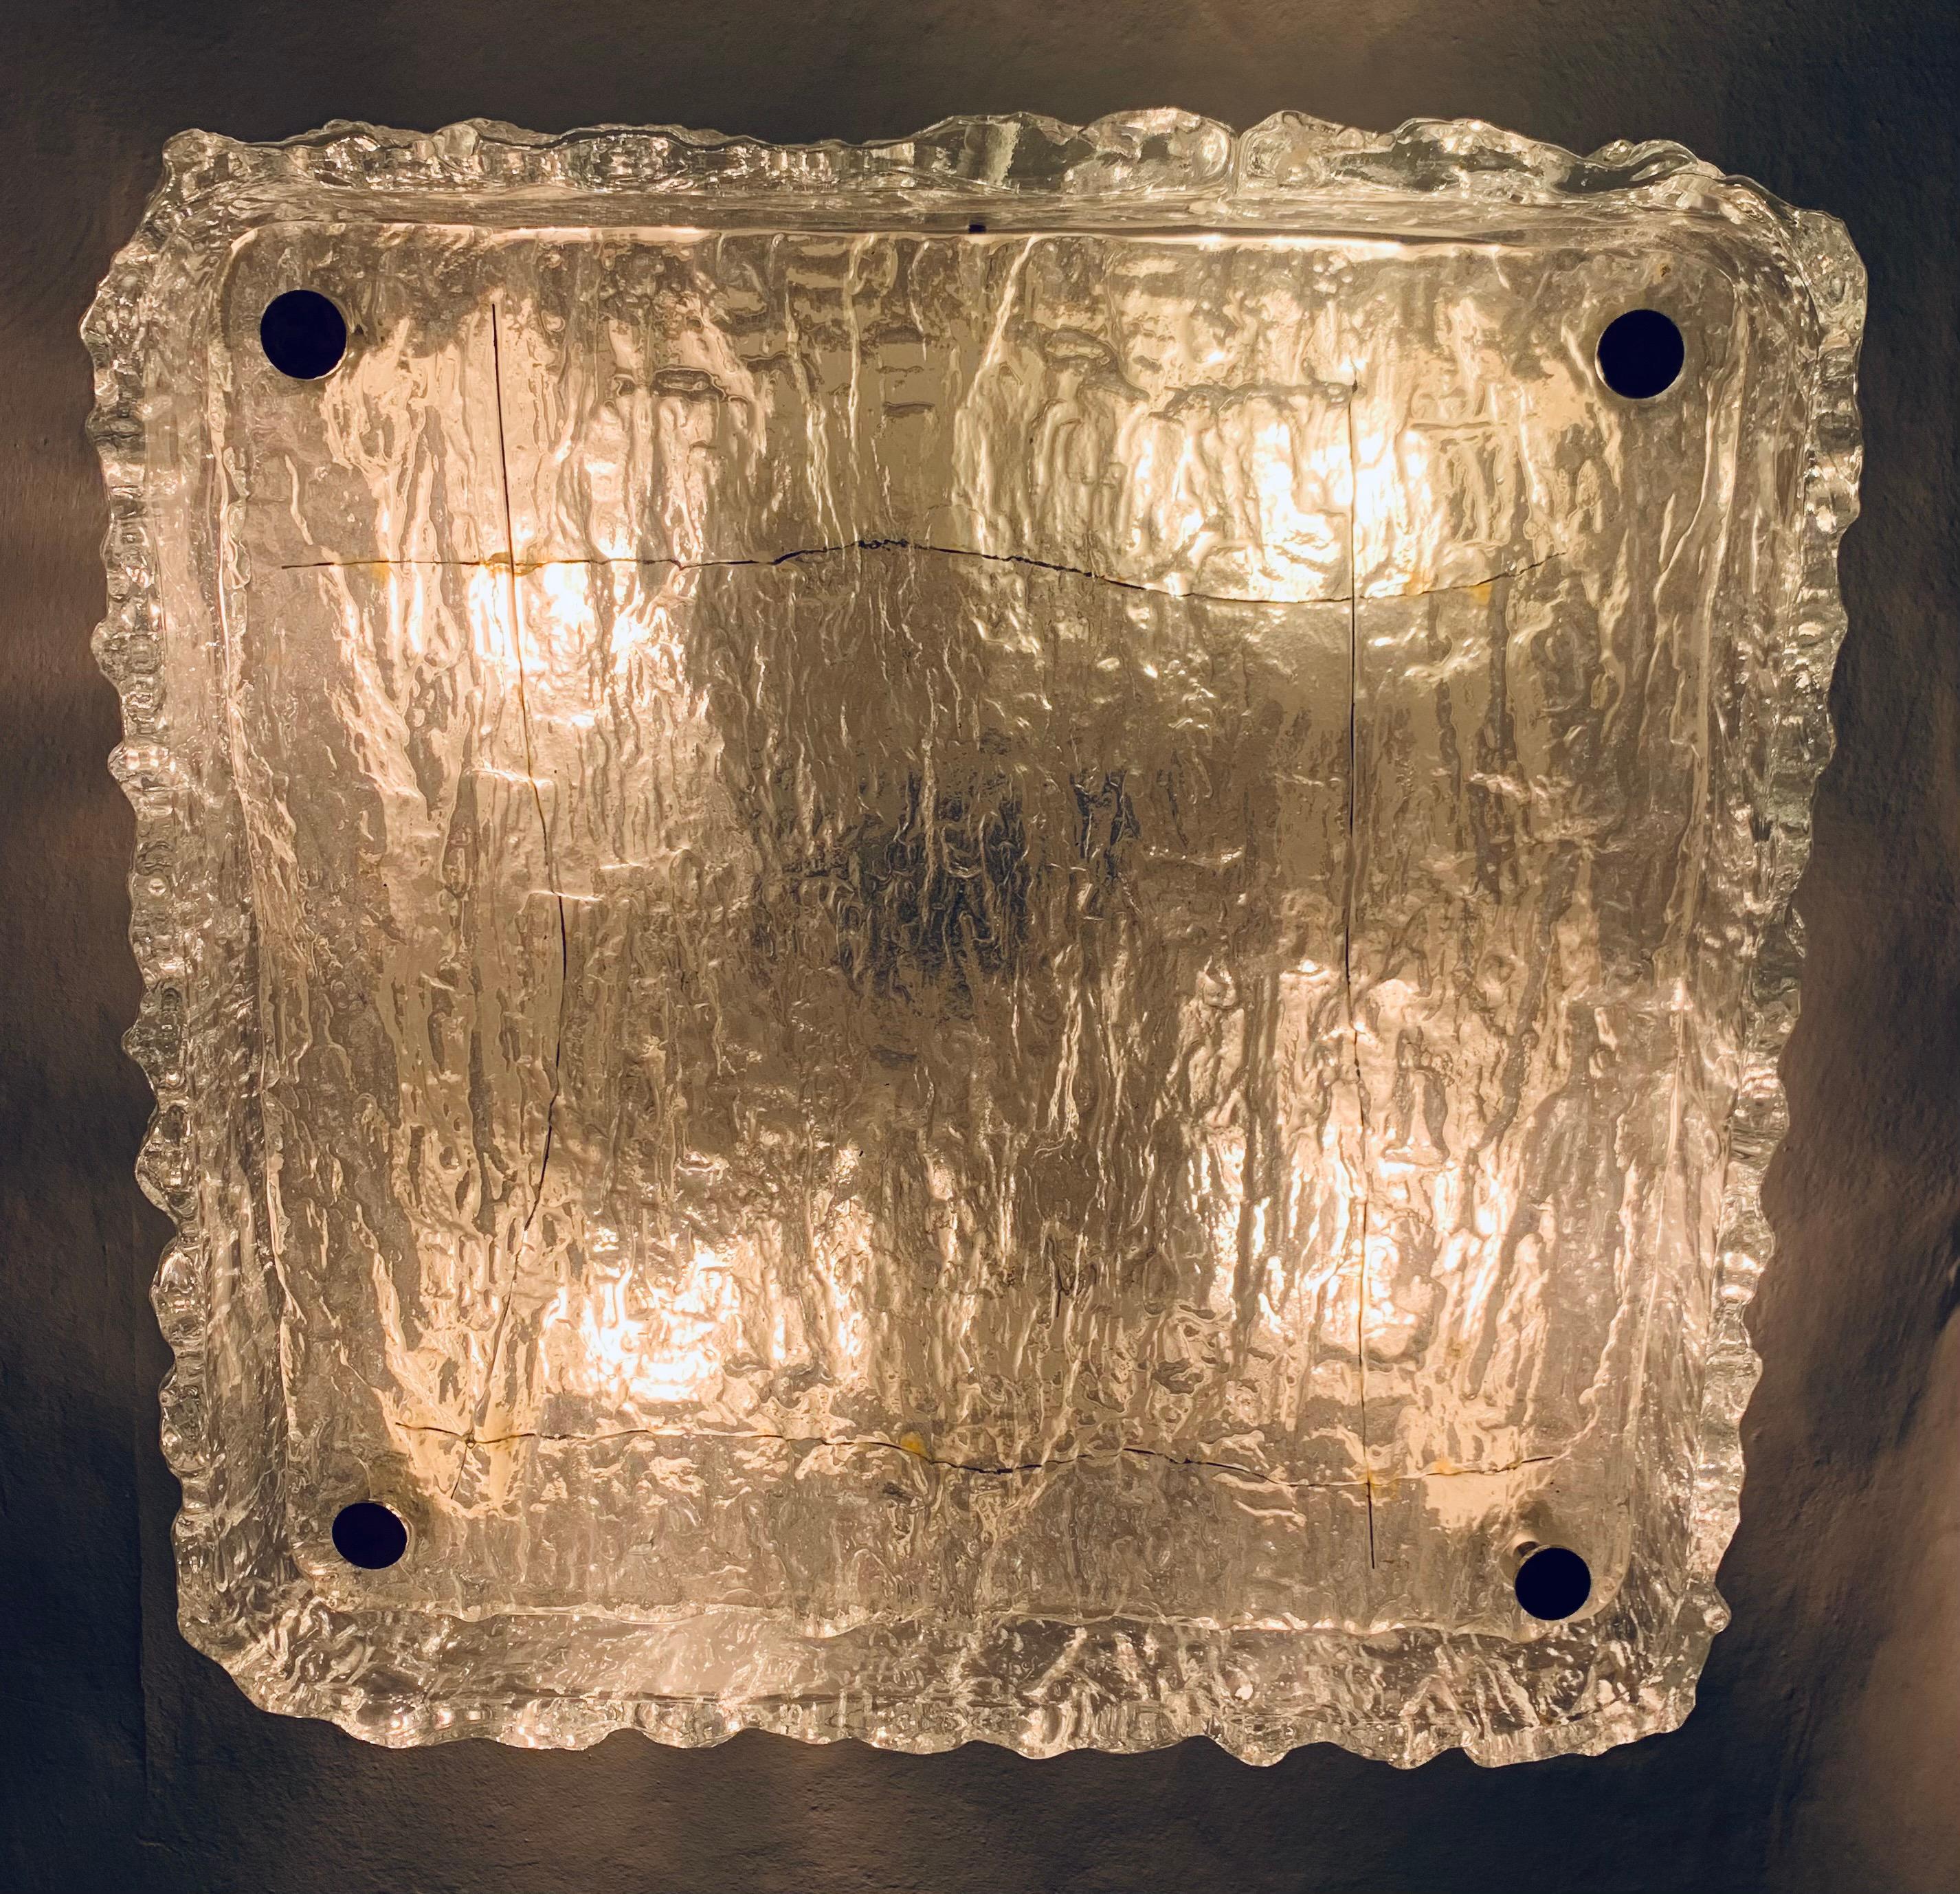 1970s, square, iced, textured, murano glass, flush mount, ceiling light. Manufactured by Kaiser Leuchten in Germany. The thick textured glass is mounted onto a white metal frame which fixes to the ceiling. 4 chrome screws hold the square glass shade